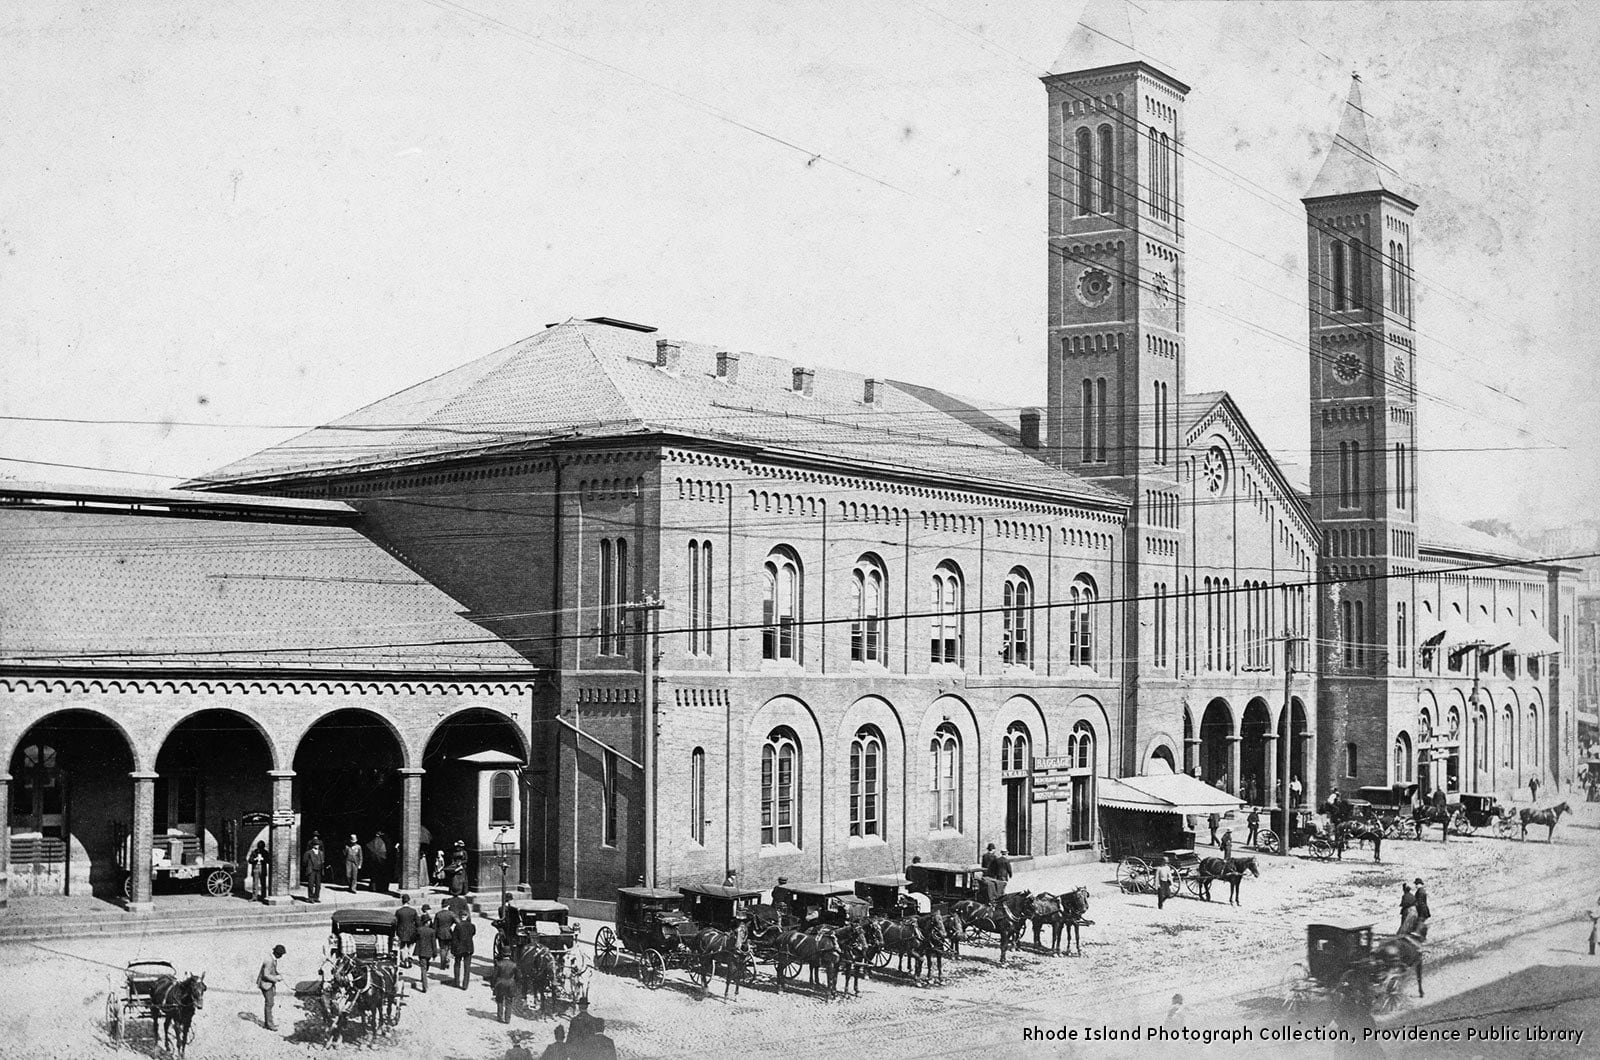 A handsome red-brick railroad station with two long single story passenger terminal wings on either side of a central pavilion. Brick ornamentation was in the form of drip mouldings along the cornices and surrounding rounded arch window groupings and arched supports for covered walkway openings. A double hip roof covered the bulk of the terminal wings while the central structure resembled a church with a steep hip roof, rosette window and the peak, and two tall slender towers projecting from either side.